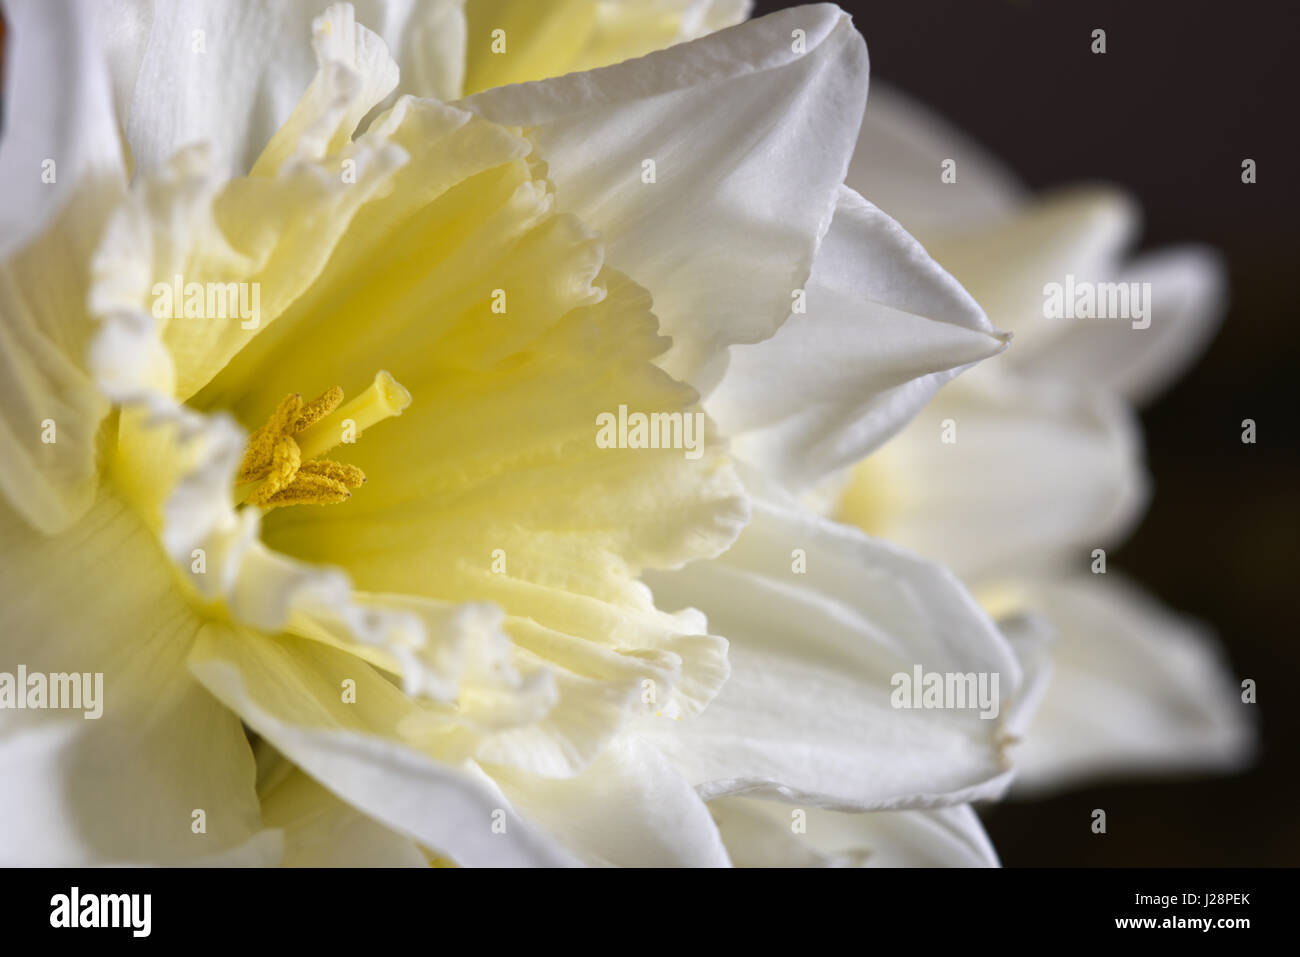 Single white daffodil with yellow trumpet. Stock Photo